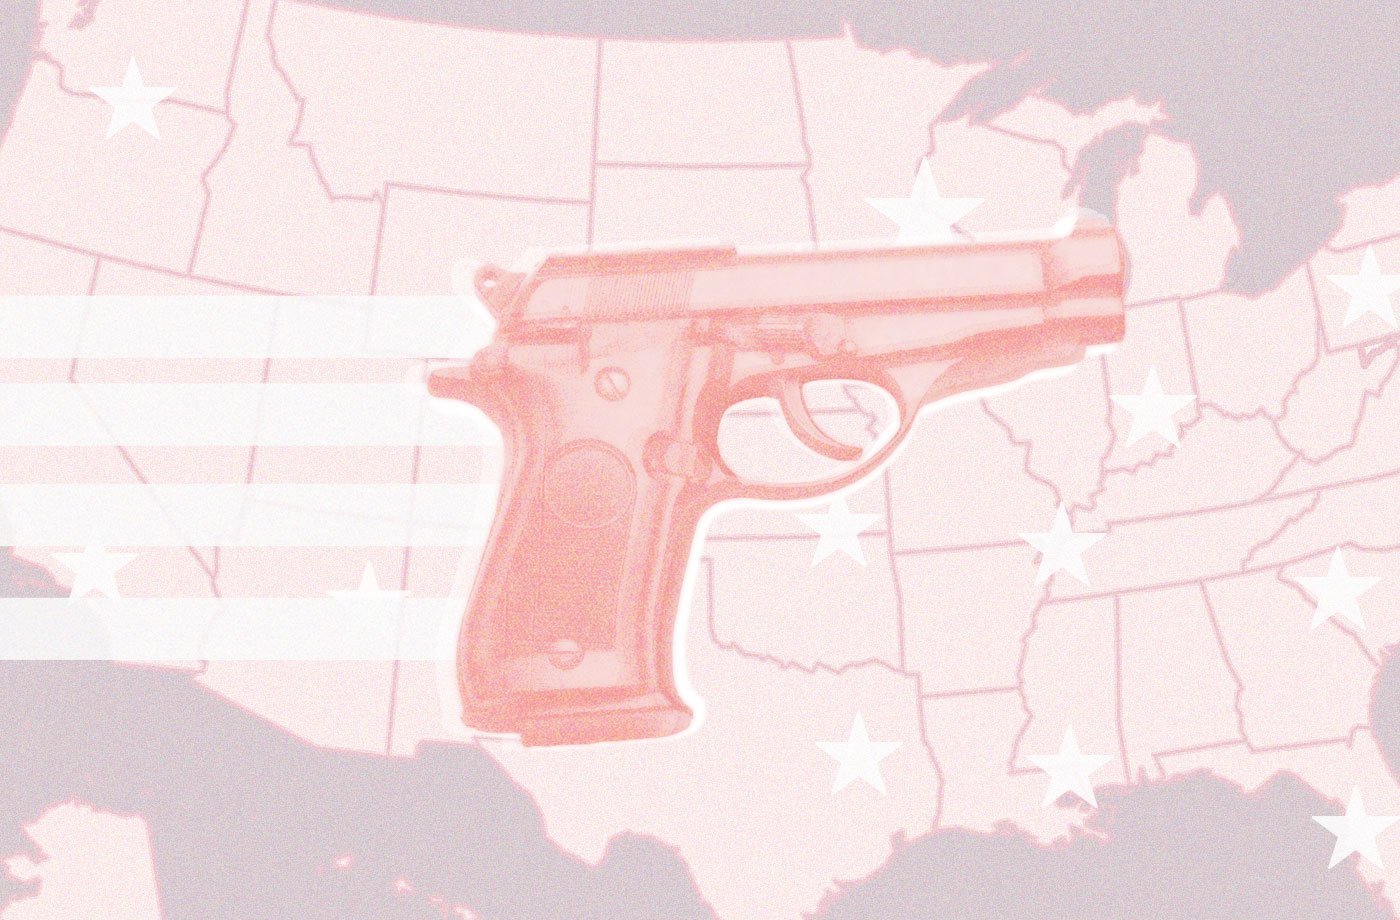 America’s Gun Violence Is a Public Health Crisis, Not Just a Tragedy - cover